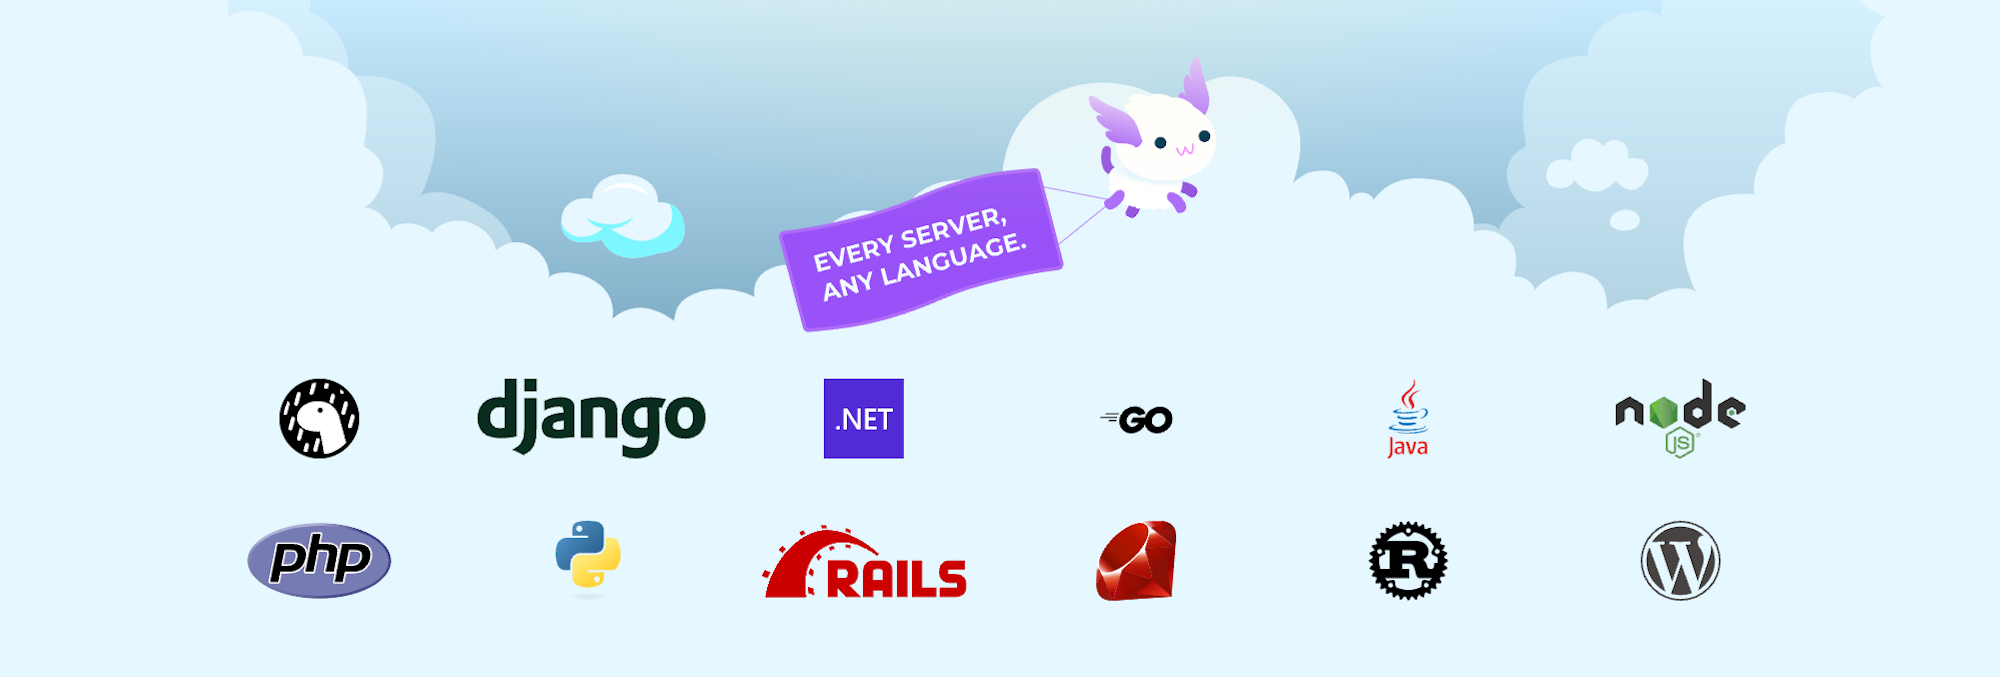 The image is a playful, cloud-themed illustration featuring logos of various programming languages and frameworks, such as Django, .NET, Go, Java, Node.js, PHP, Python, Ruby on Rails, R, and WordPress. In the center, a cute, winged mascot is pulling a banner that says EVERY SERVER, ANY LANGUAGE suggesting a platform or service that supports multiple programming languages across different server environments. The background is a light blue sky with fluffy clouds, adding to the airy, cloud computing motif.